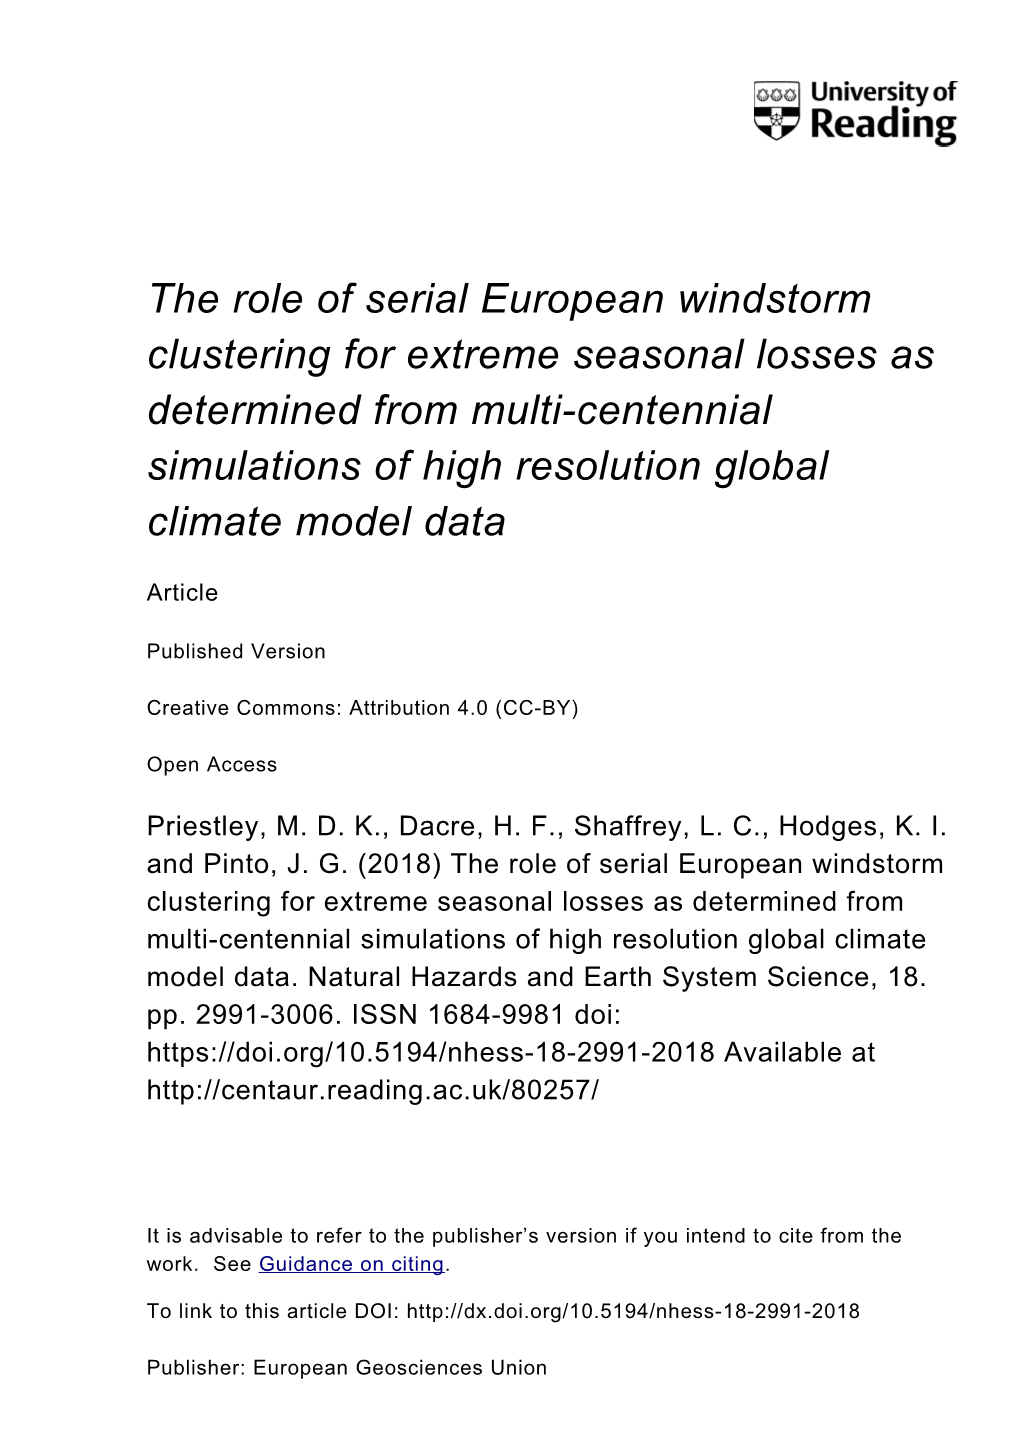 The Role of Serial European Windstorm Clustering for Extreme Seasonal Losses As Determined from Multi-Centennial Simulations Of